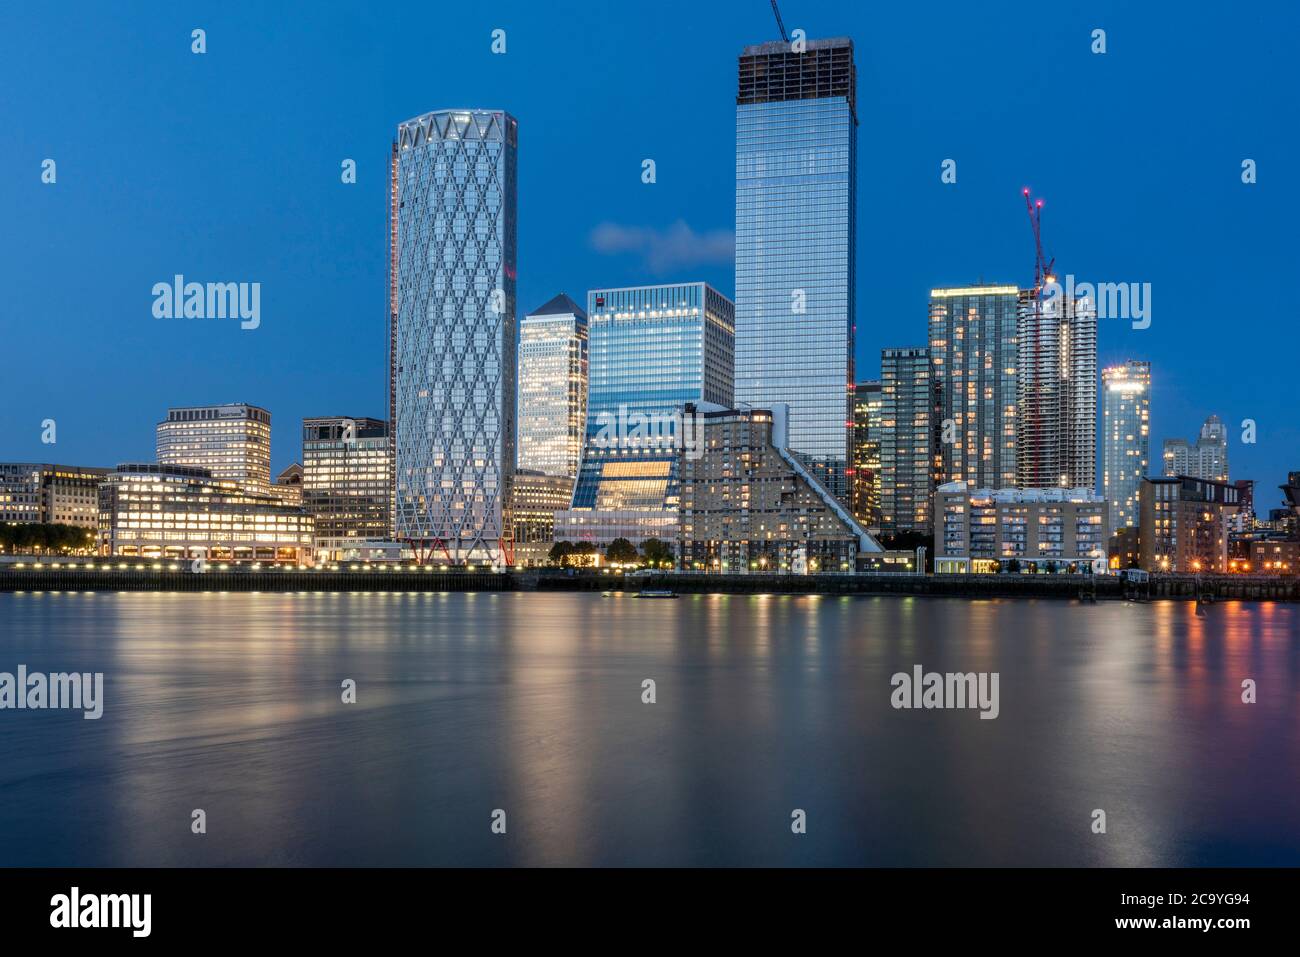 View across Thames from west at sunset with reflection in water. Isle of Dogs, London, United Kingdom. Architect: Various, 2020. Stock Photo